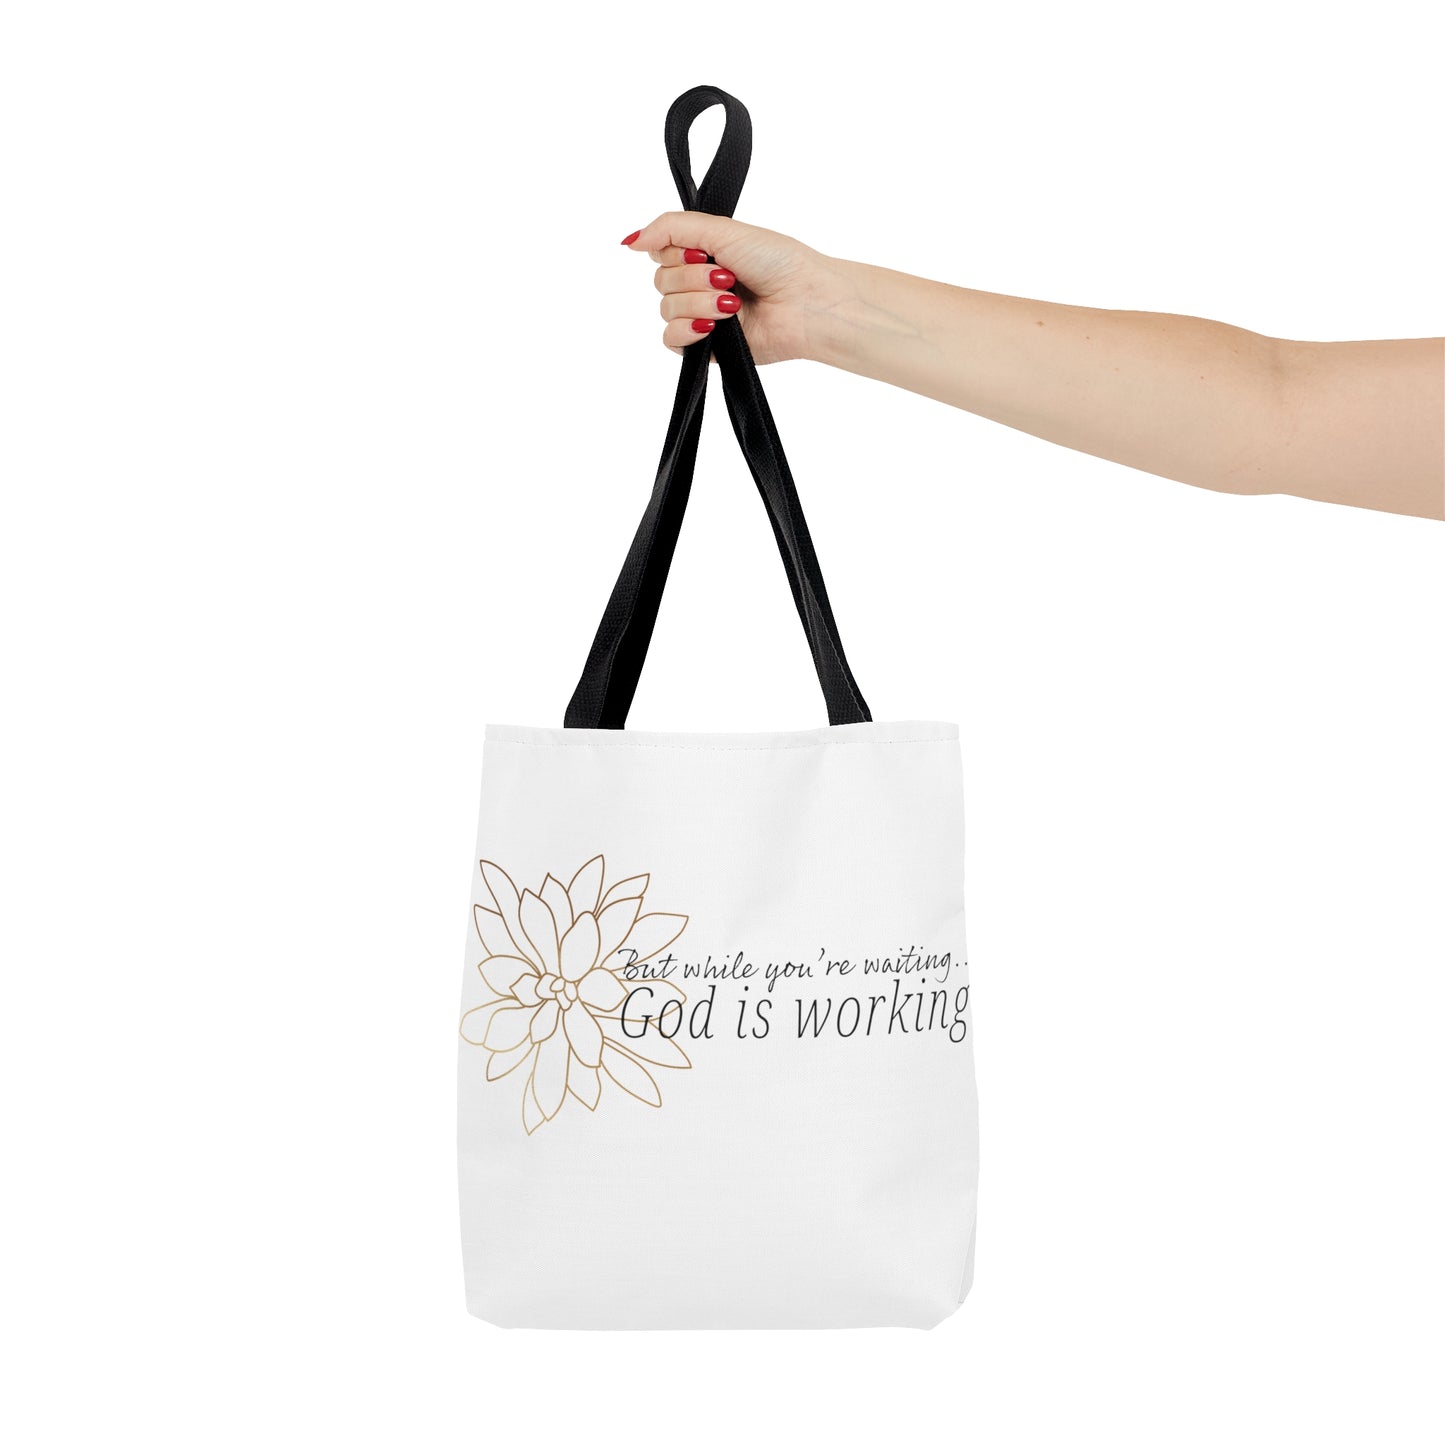 God is Working Tote Bag, Women's Tote Bag, Trendy Christian